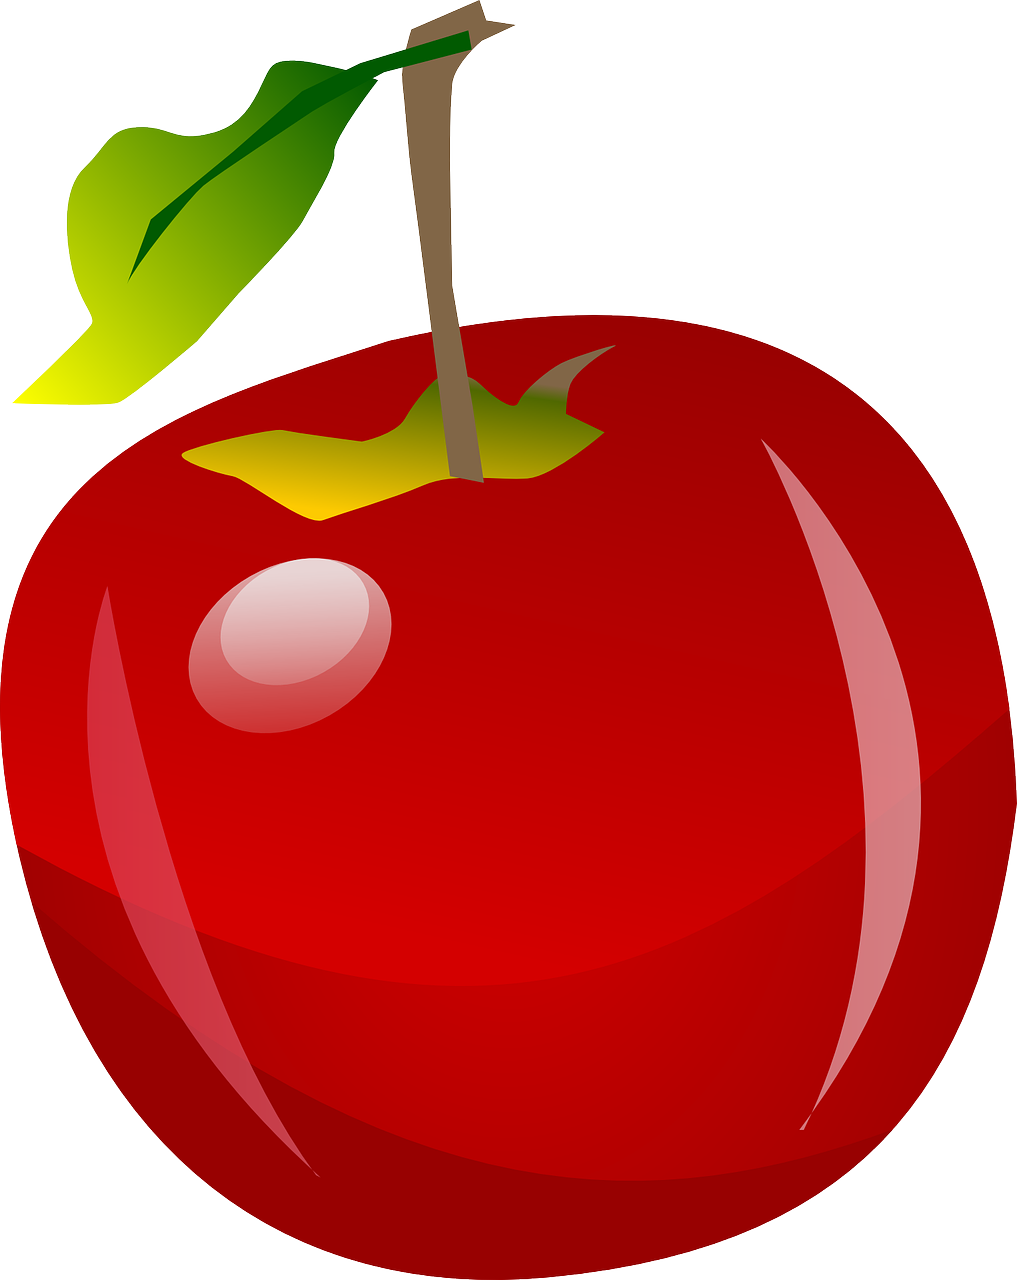 Red apple clipart clipartcow